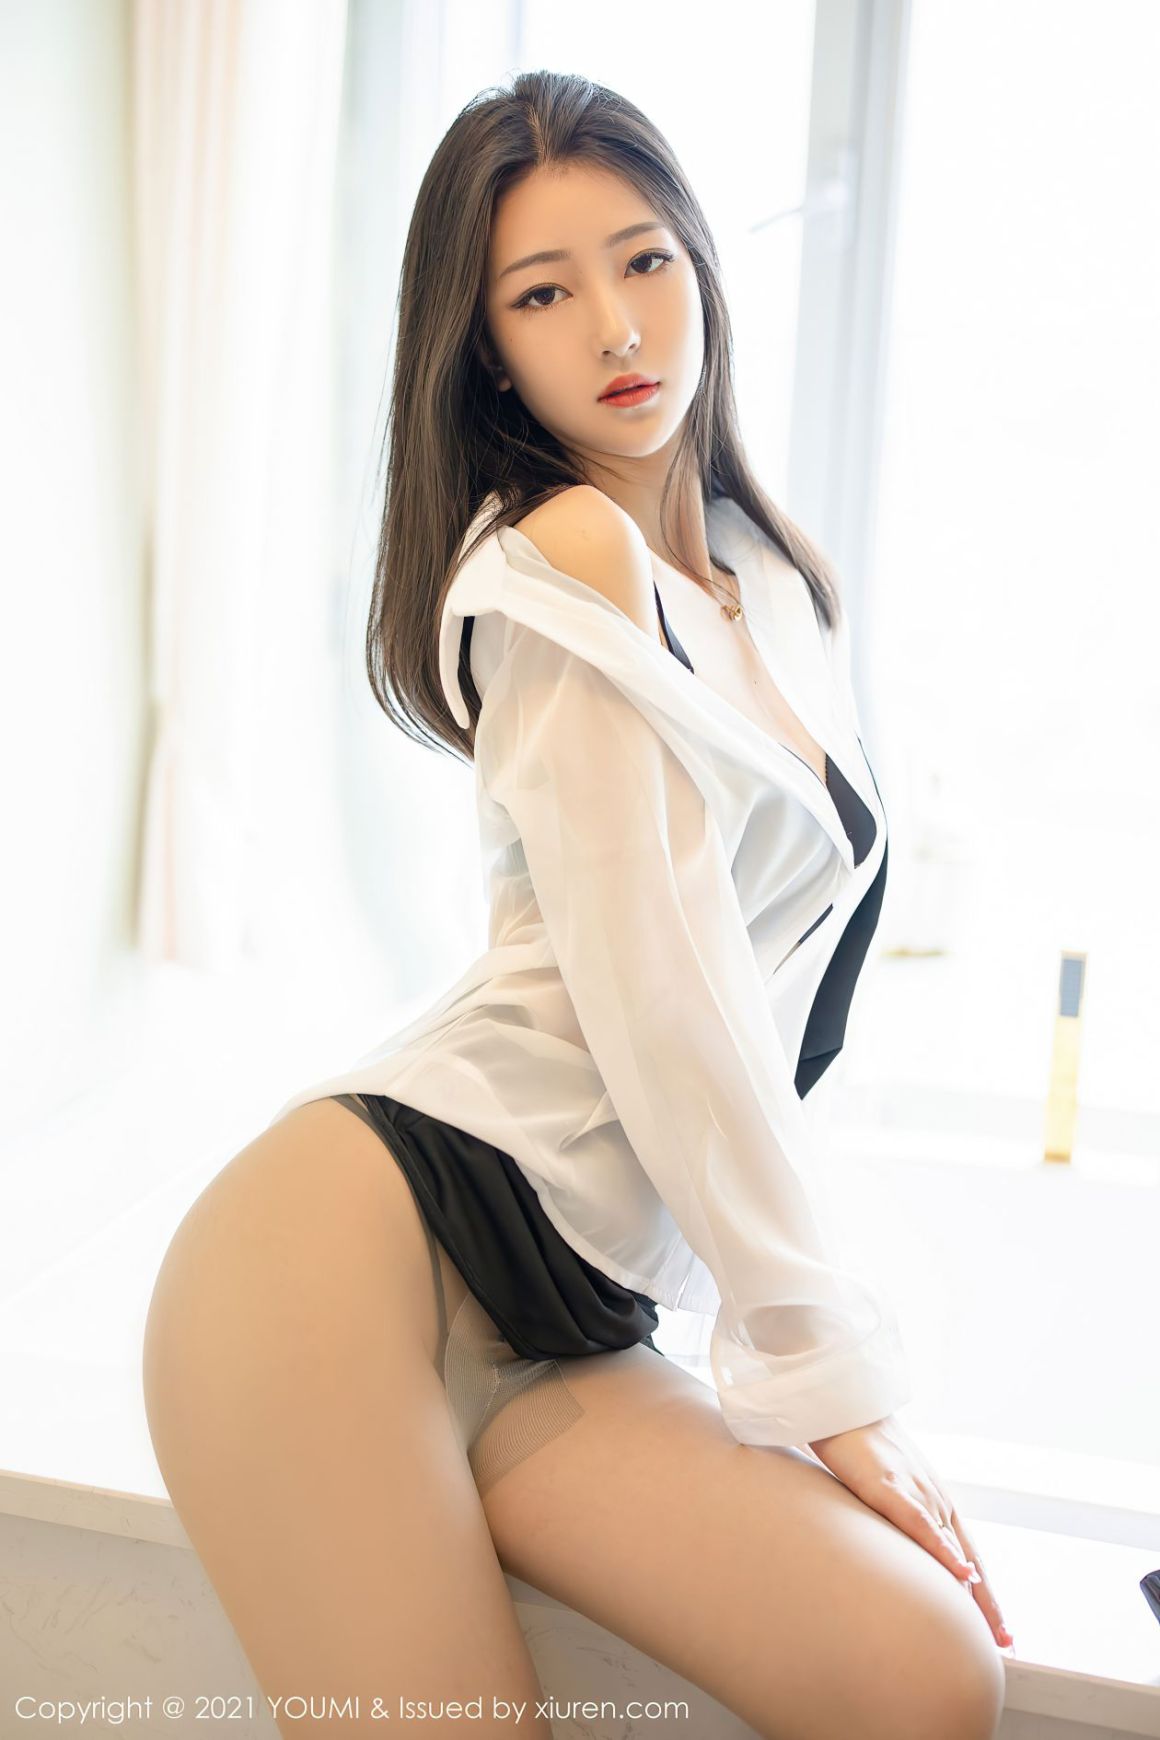 AsianOnlyfans.com 44 144 20211009